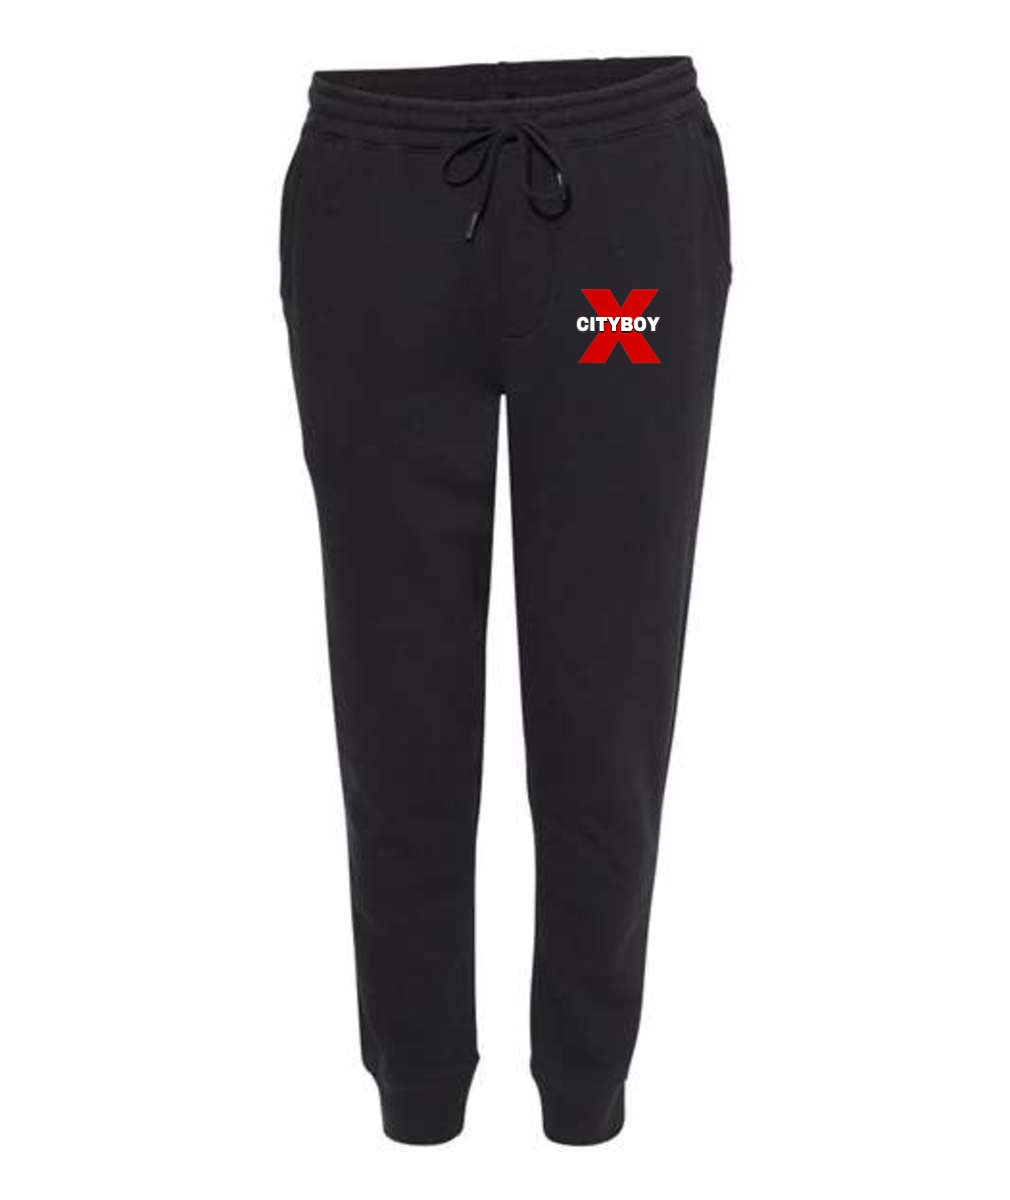 CITYBOY print Independent Trading Co. - Midweight Fleece Embroidered Joggers or Similar